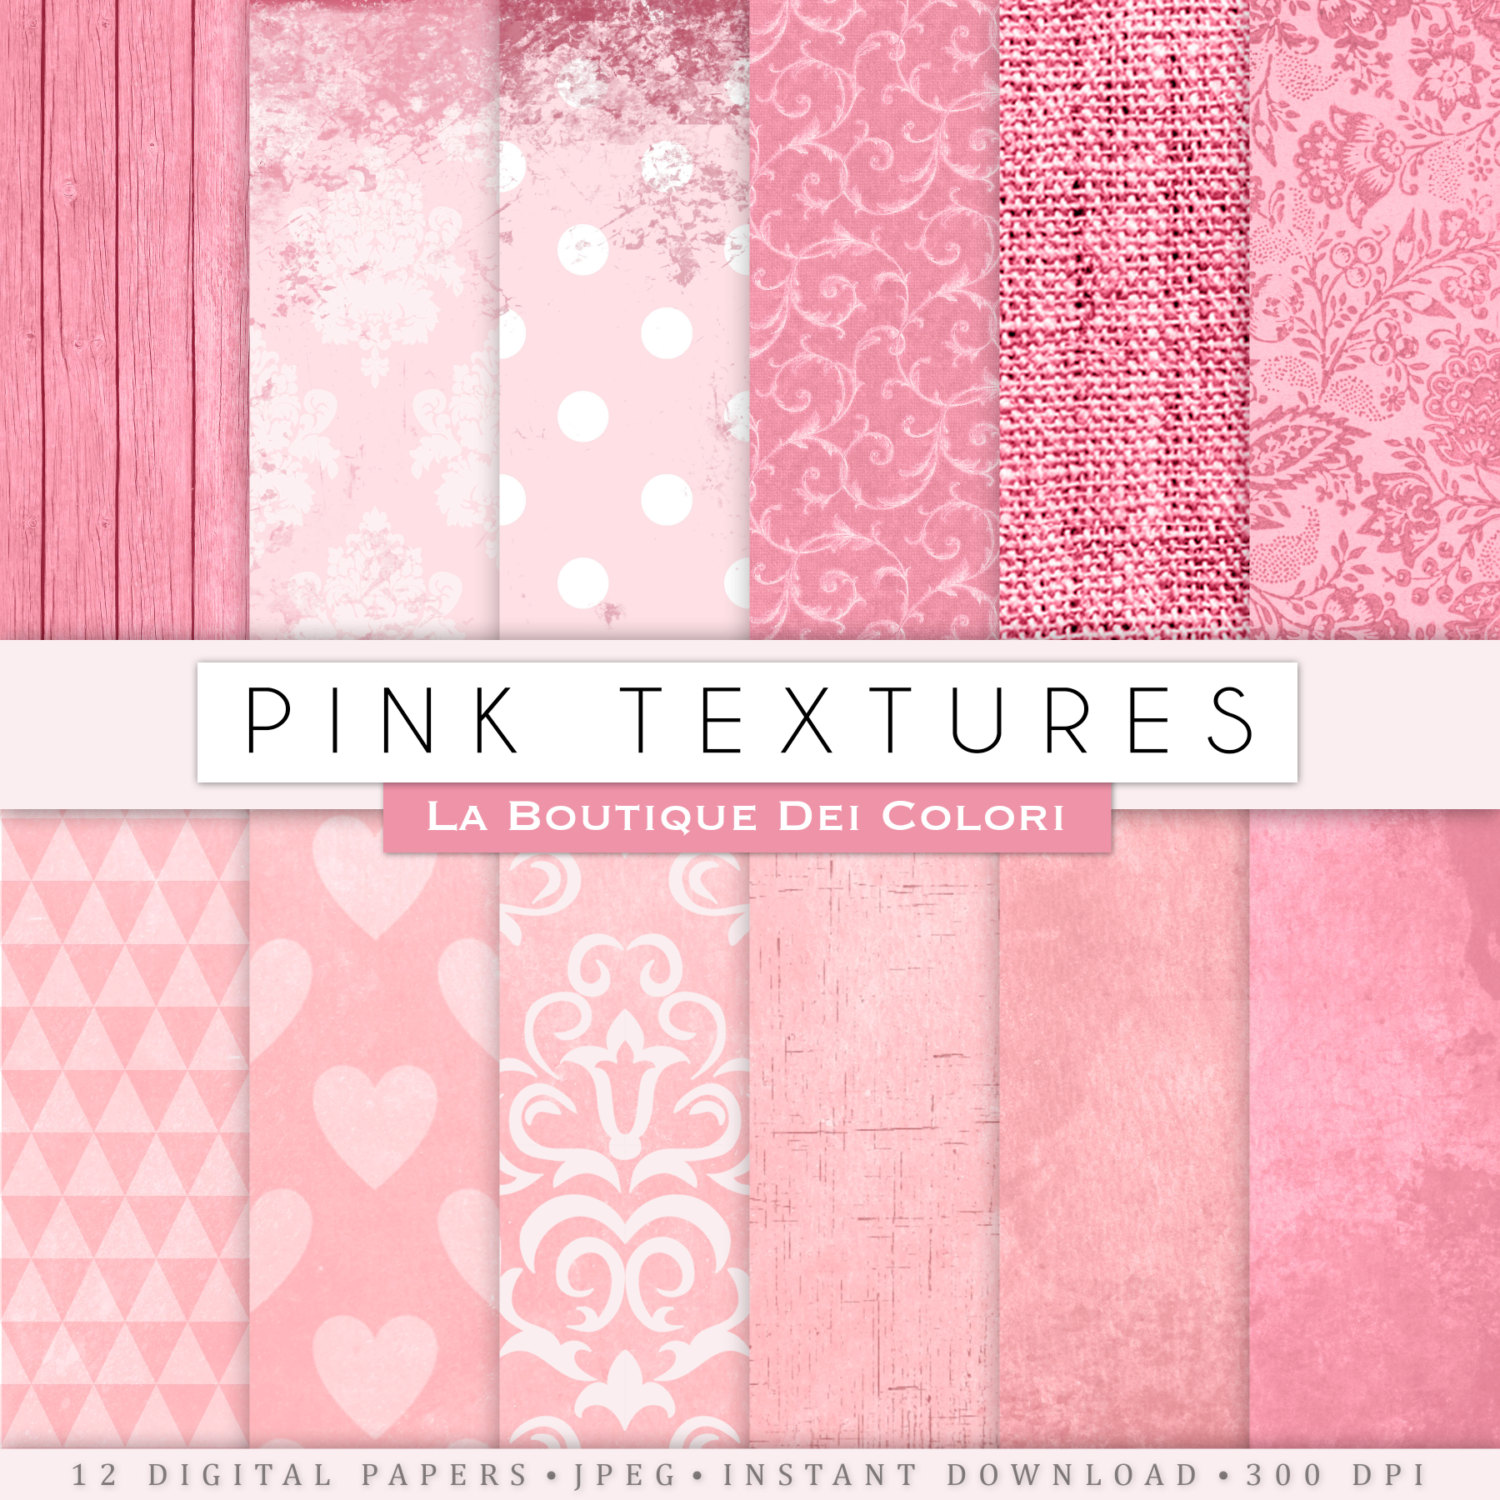 Pink texture paperpink background damask geometric